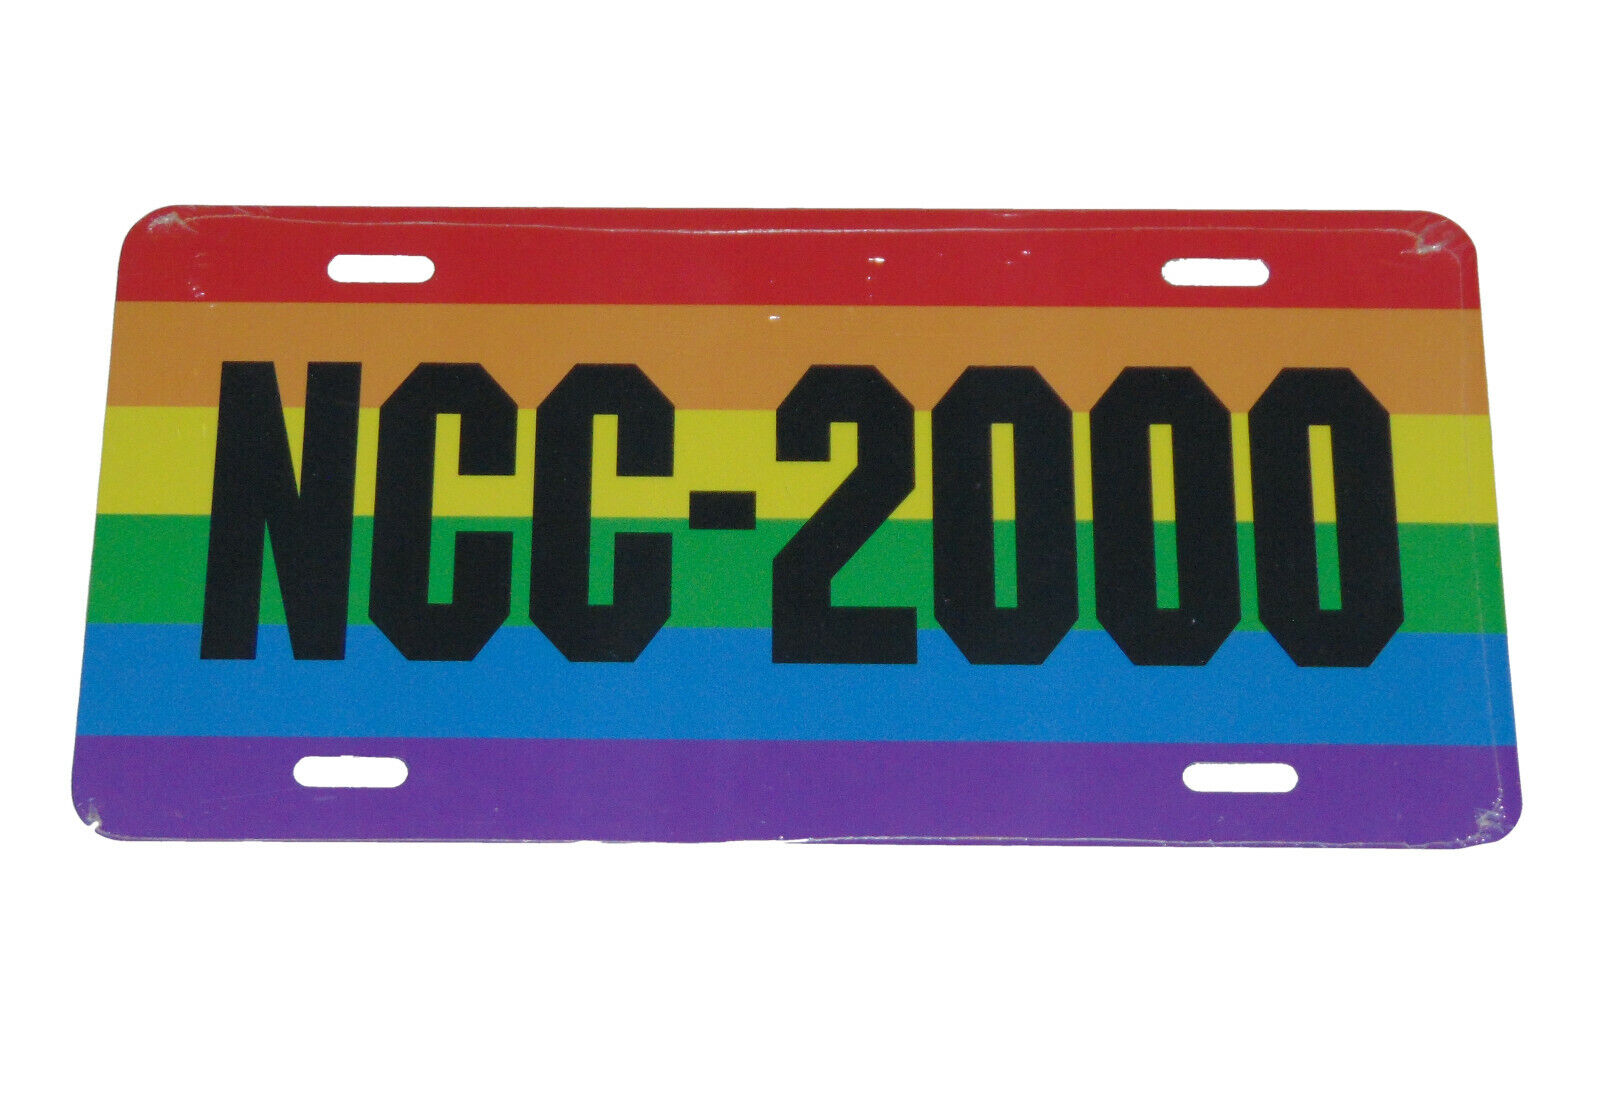  U.S.S. Excelsior NCC-2000 Cpt. Sulu License Plate 6 X 12 Inches New Aluminum